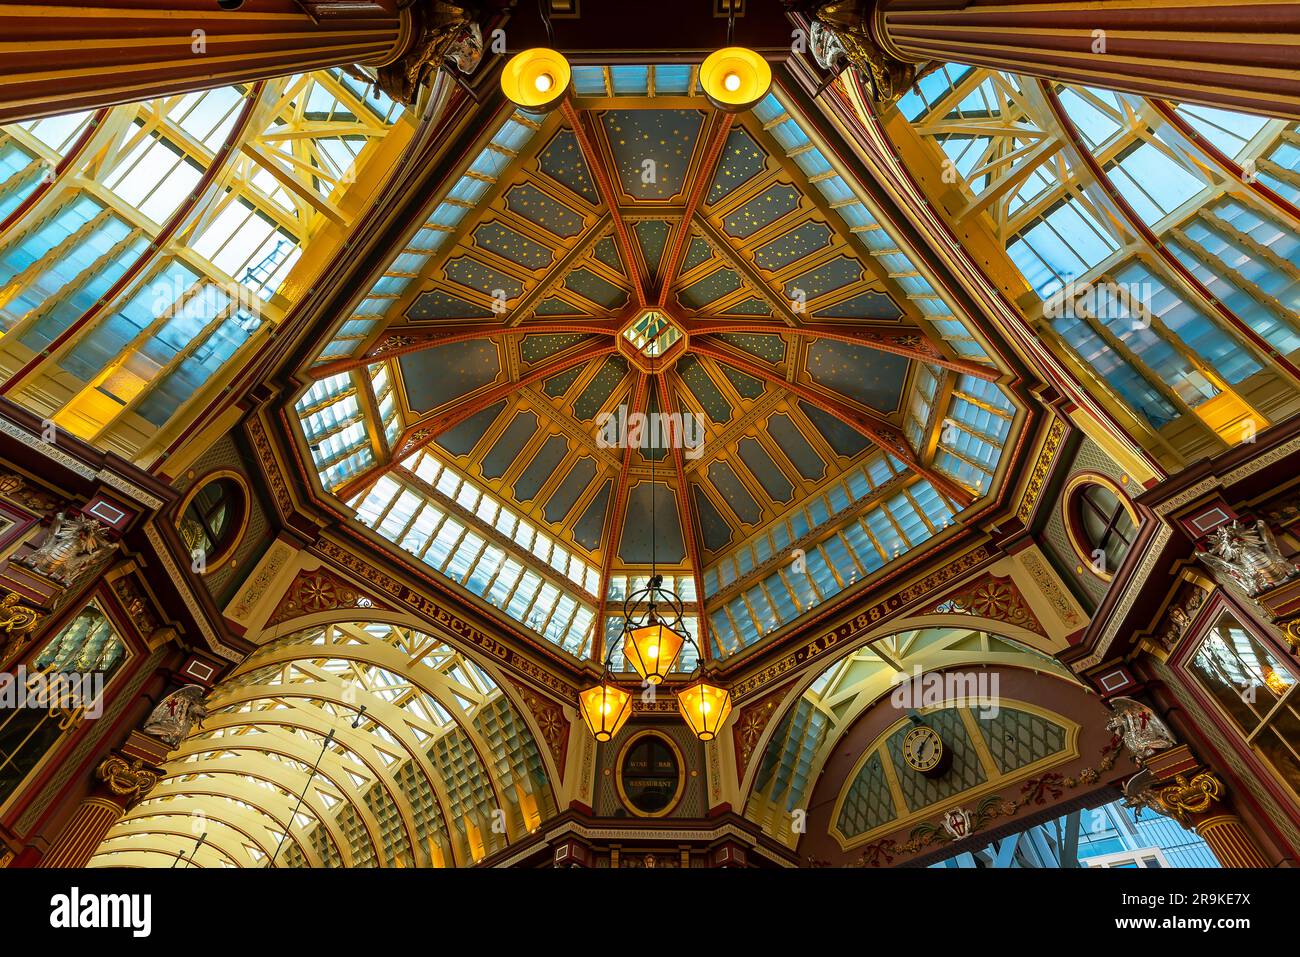 Iconic painted roof of the Leadenhall market. Built in 1881. There are many bars restaurants and shops. Famous tourist sight in London city. Stock Photo